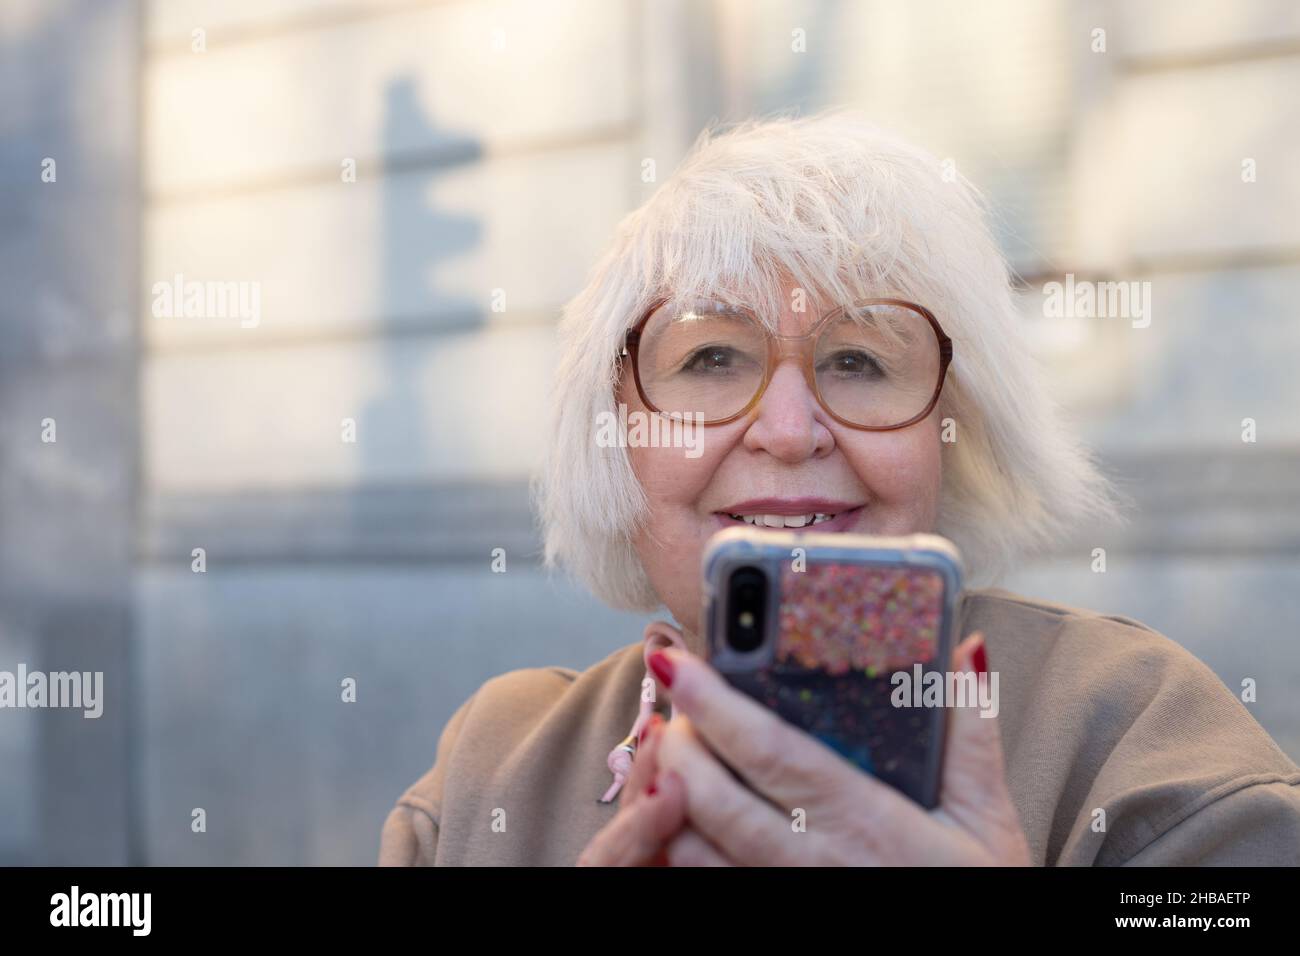 beautiful older woman with white hair looking at camera with smile and cell phone in her hands outdoors Stock Photo